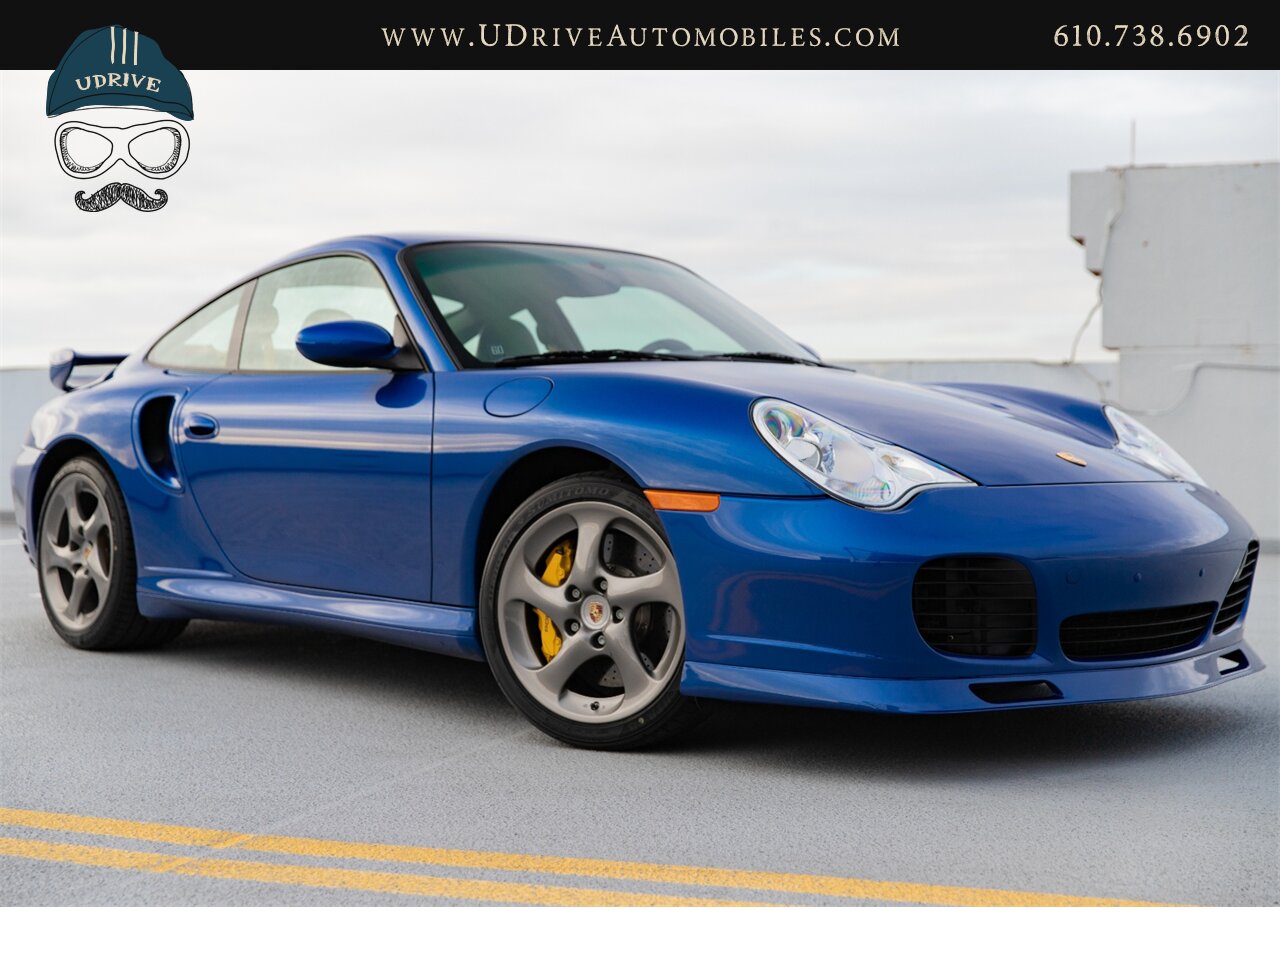 2005 Porsche 911 Turbo S Factory Aerokit Extremely Rare Cobalt Blue  Yellow Deviating Stitching 1 of a Kind Spec $160k MSRP - Photo 4 - West Chester, PA 19382